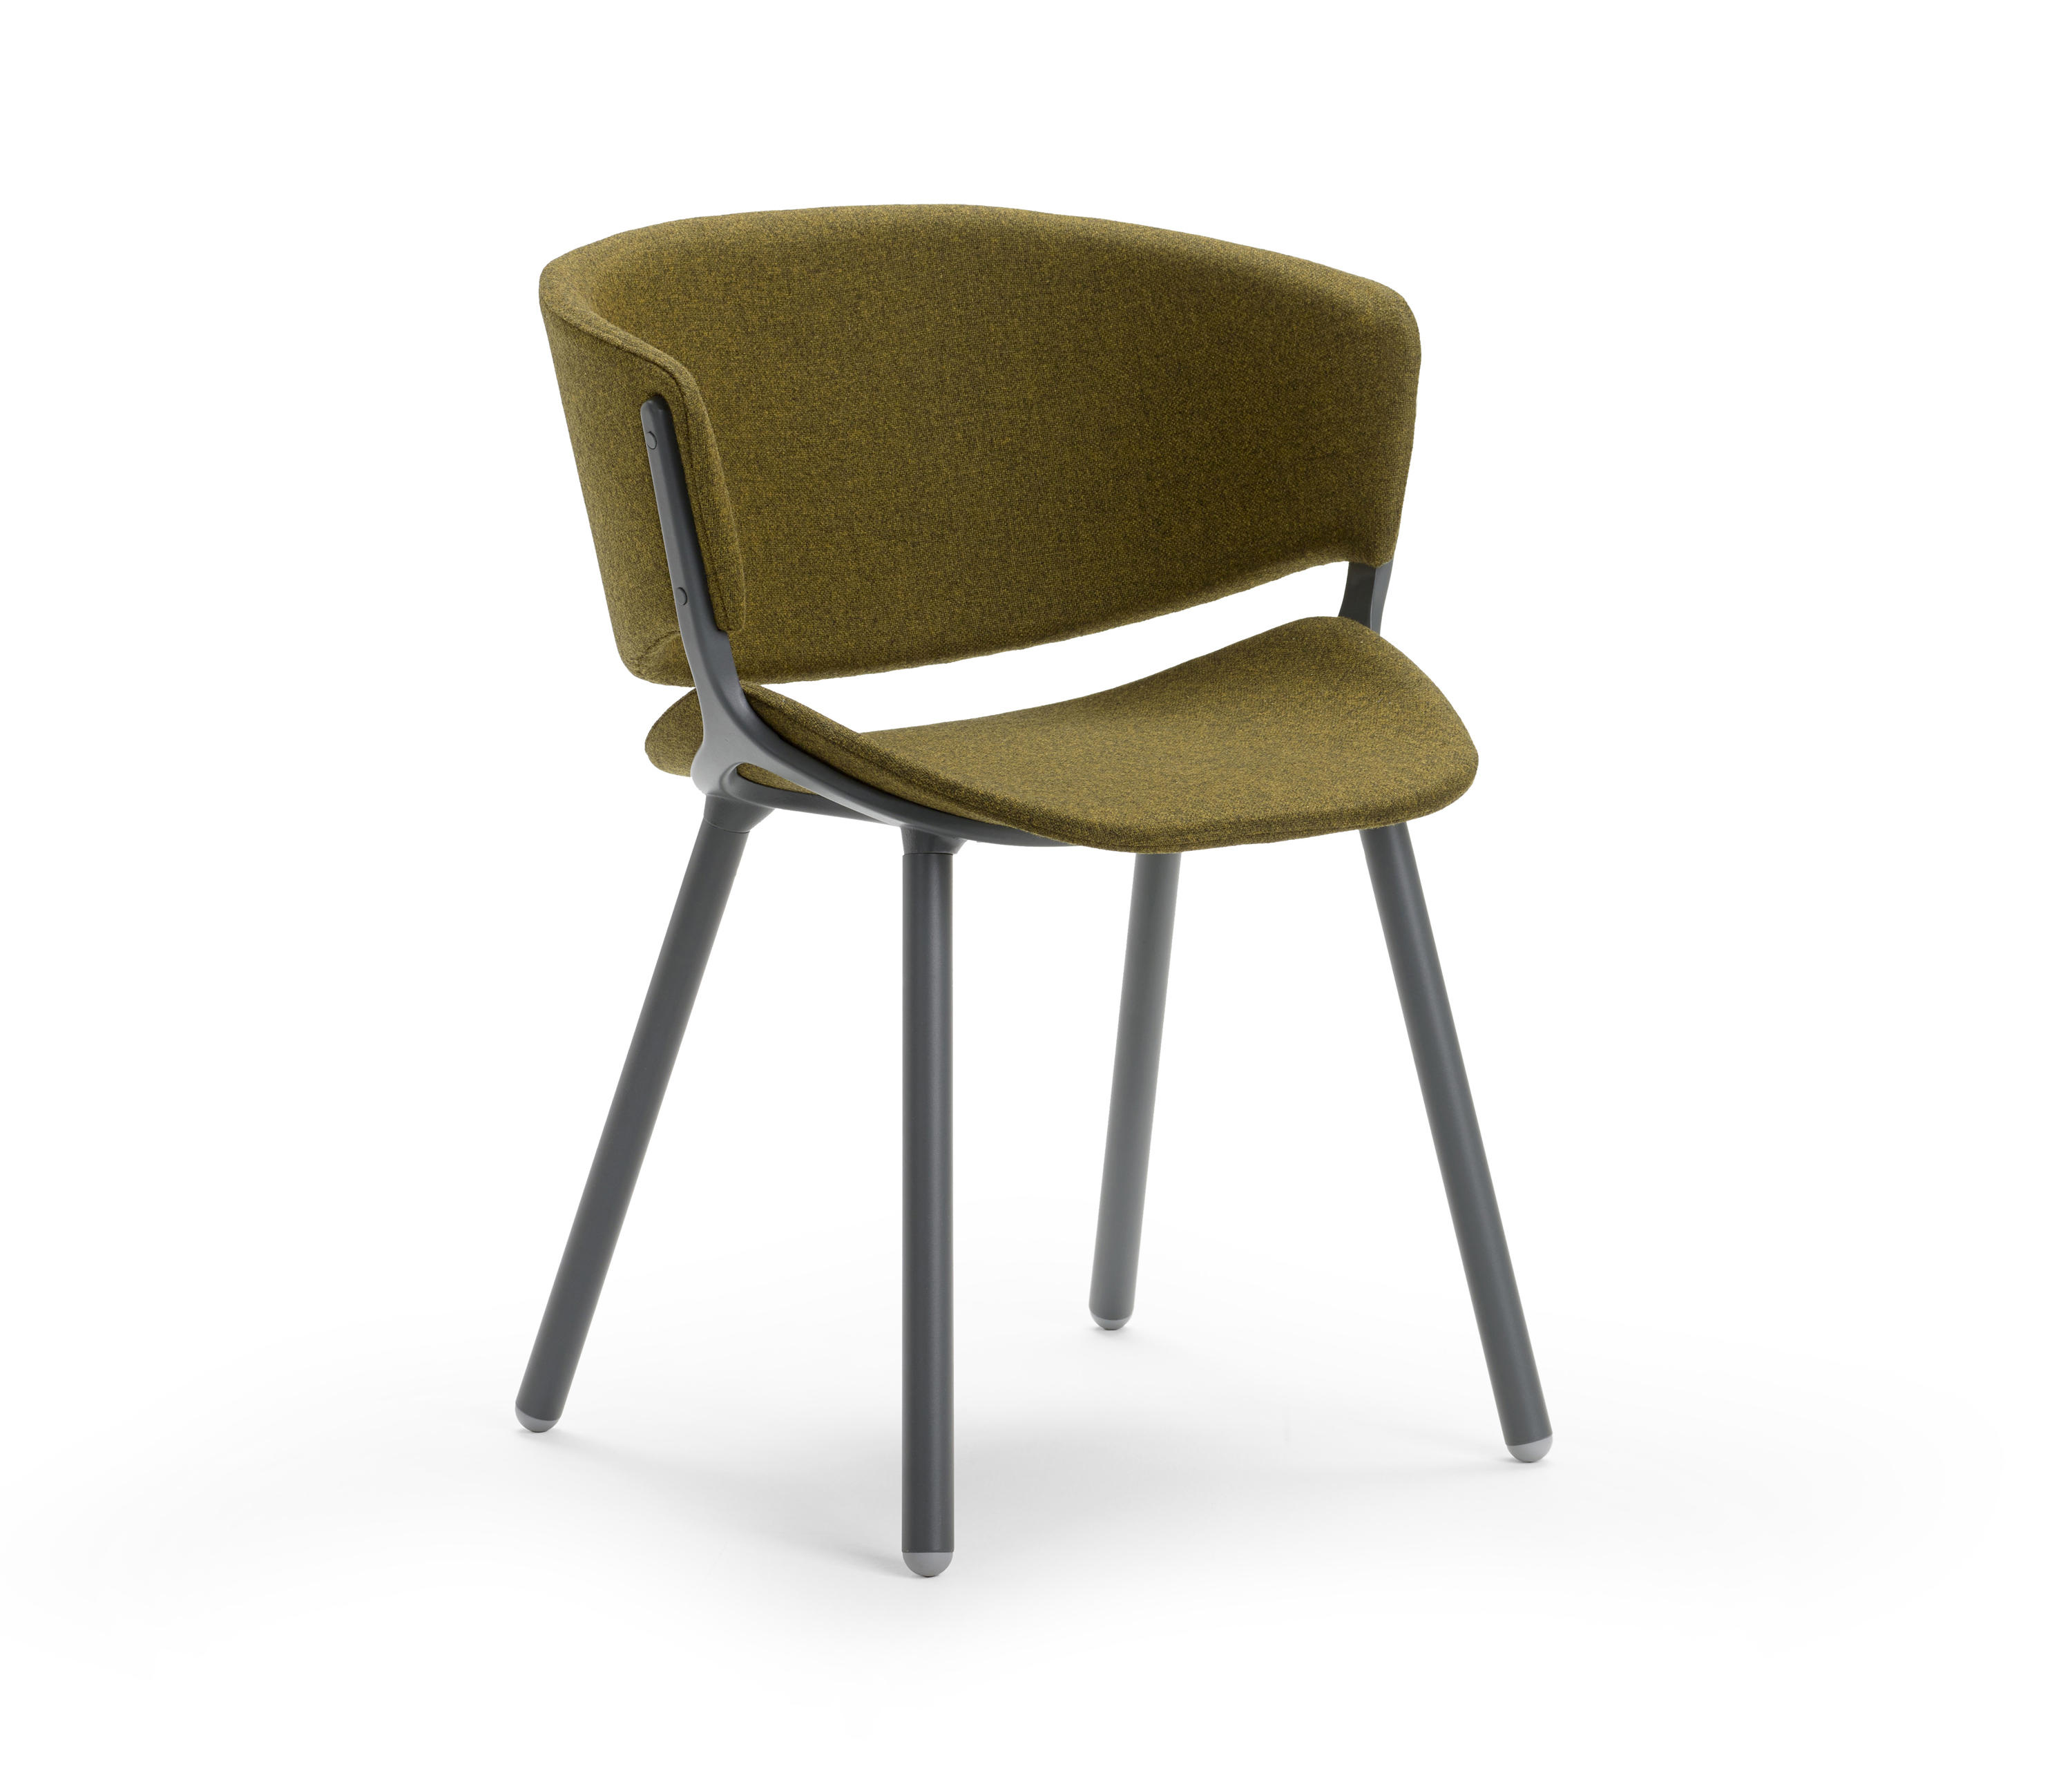 Phoenix Chair by Luca Nichetto for Offecct